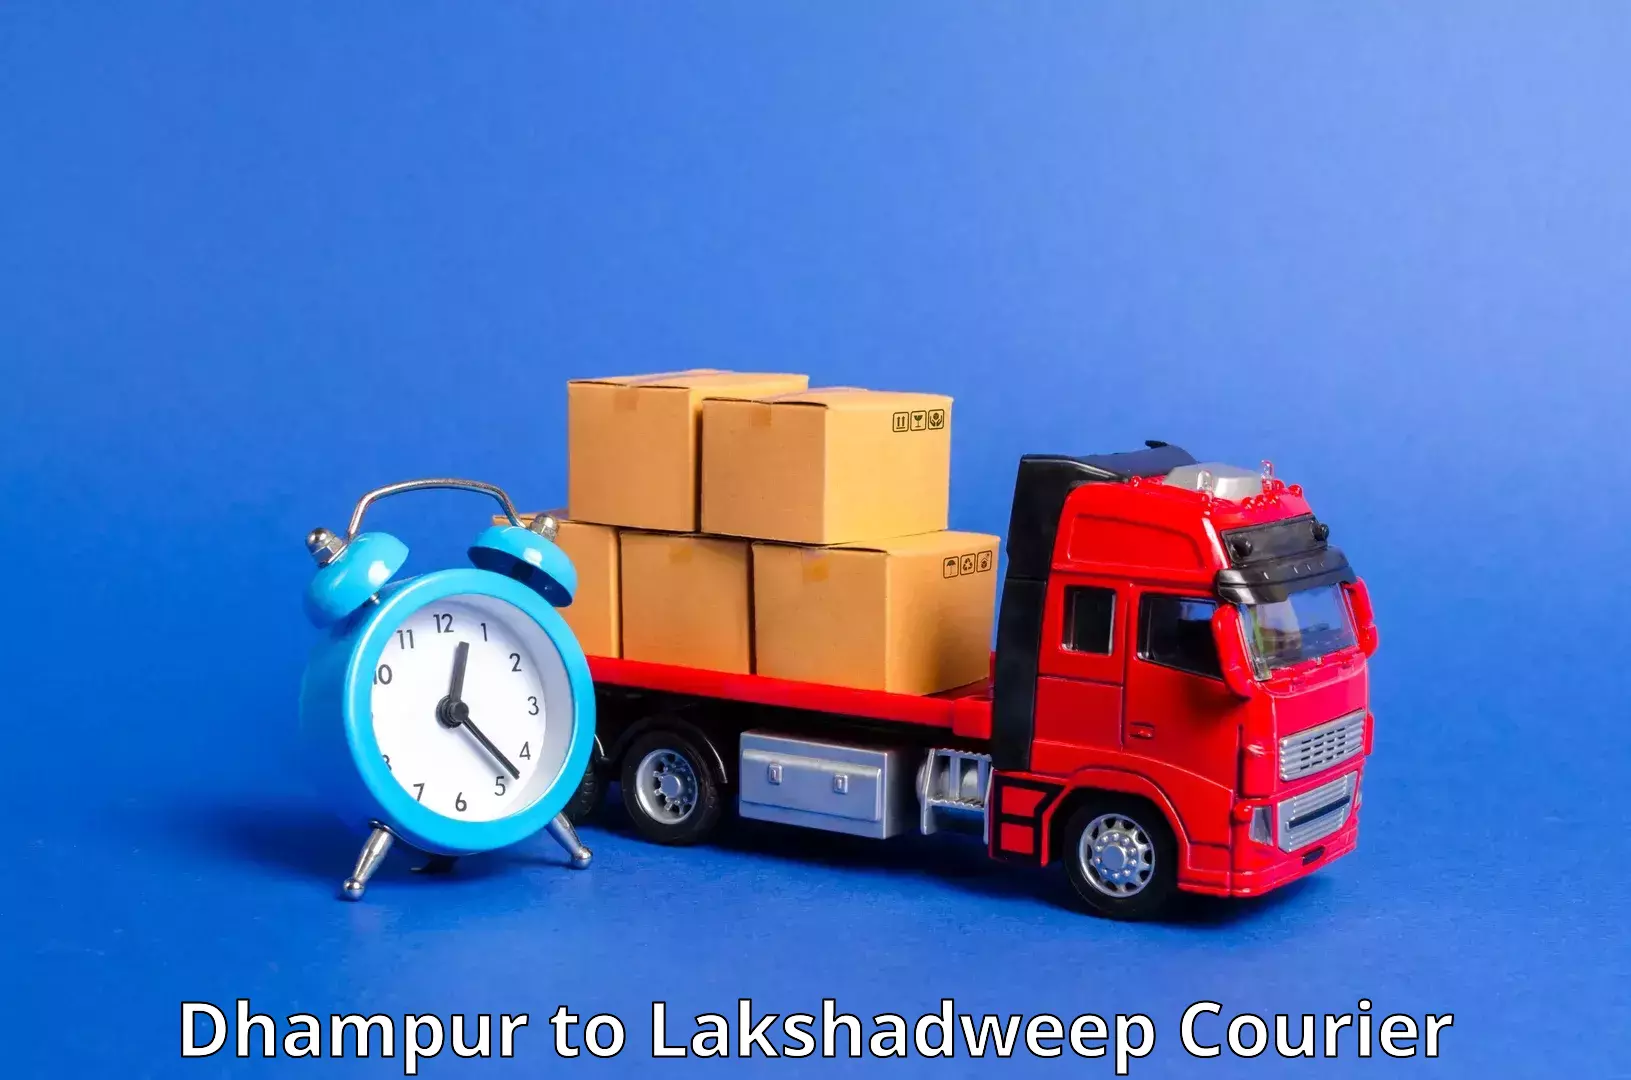 Urgent courier needs Dhampur to Lakshadweep